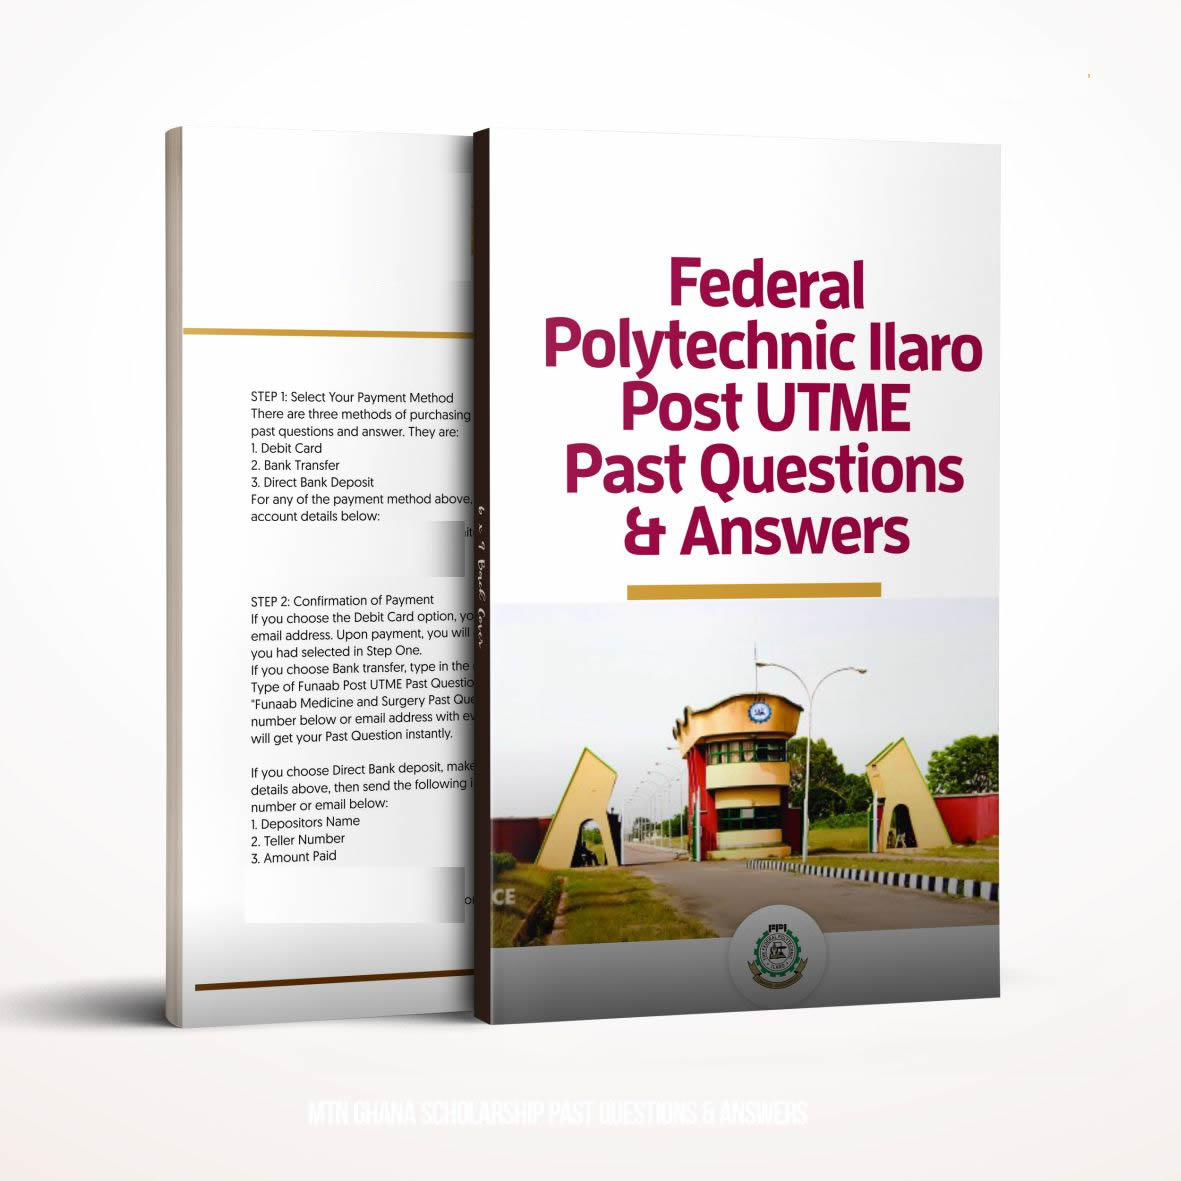 FED POLY ILARO Post UTME past questions and answers